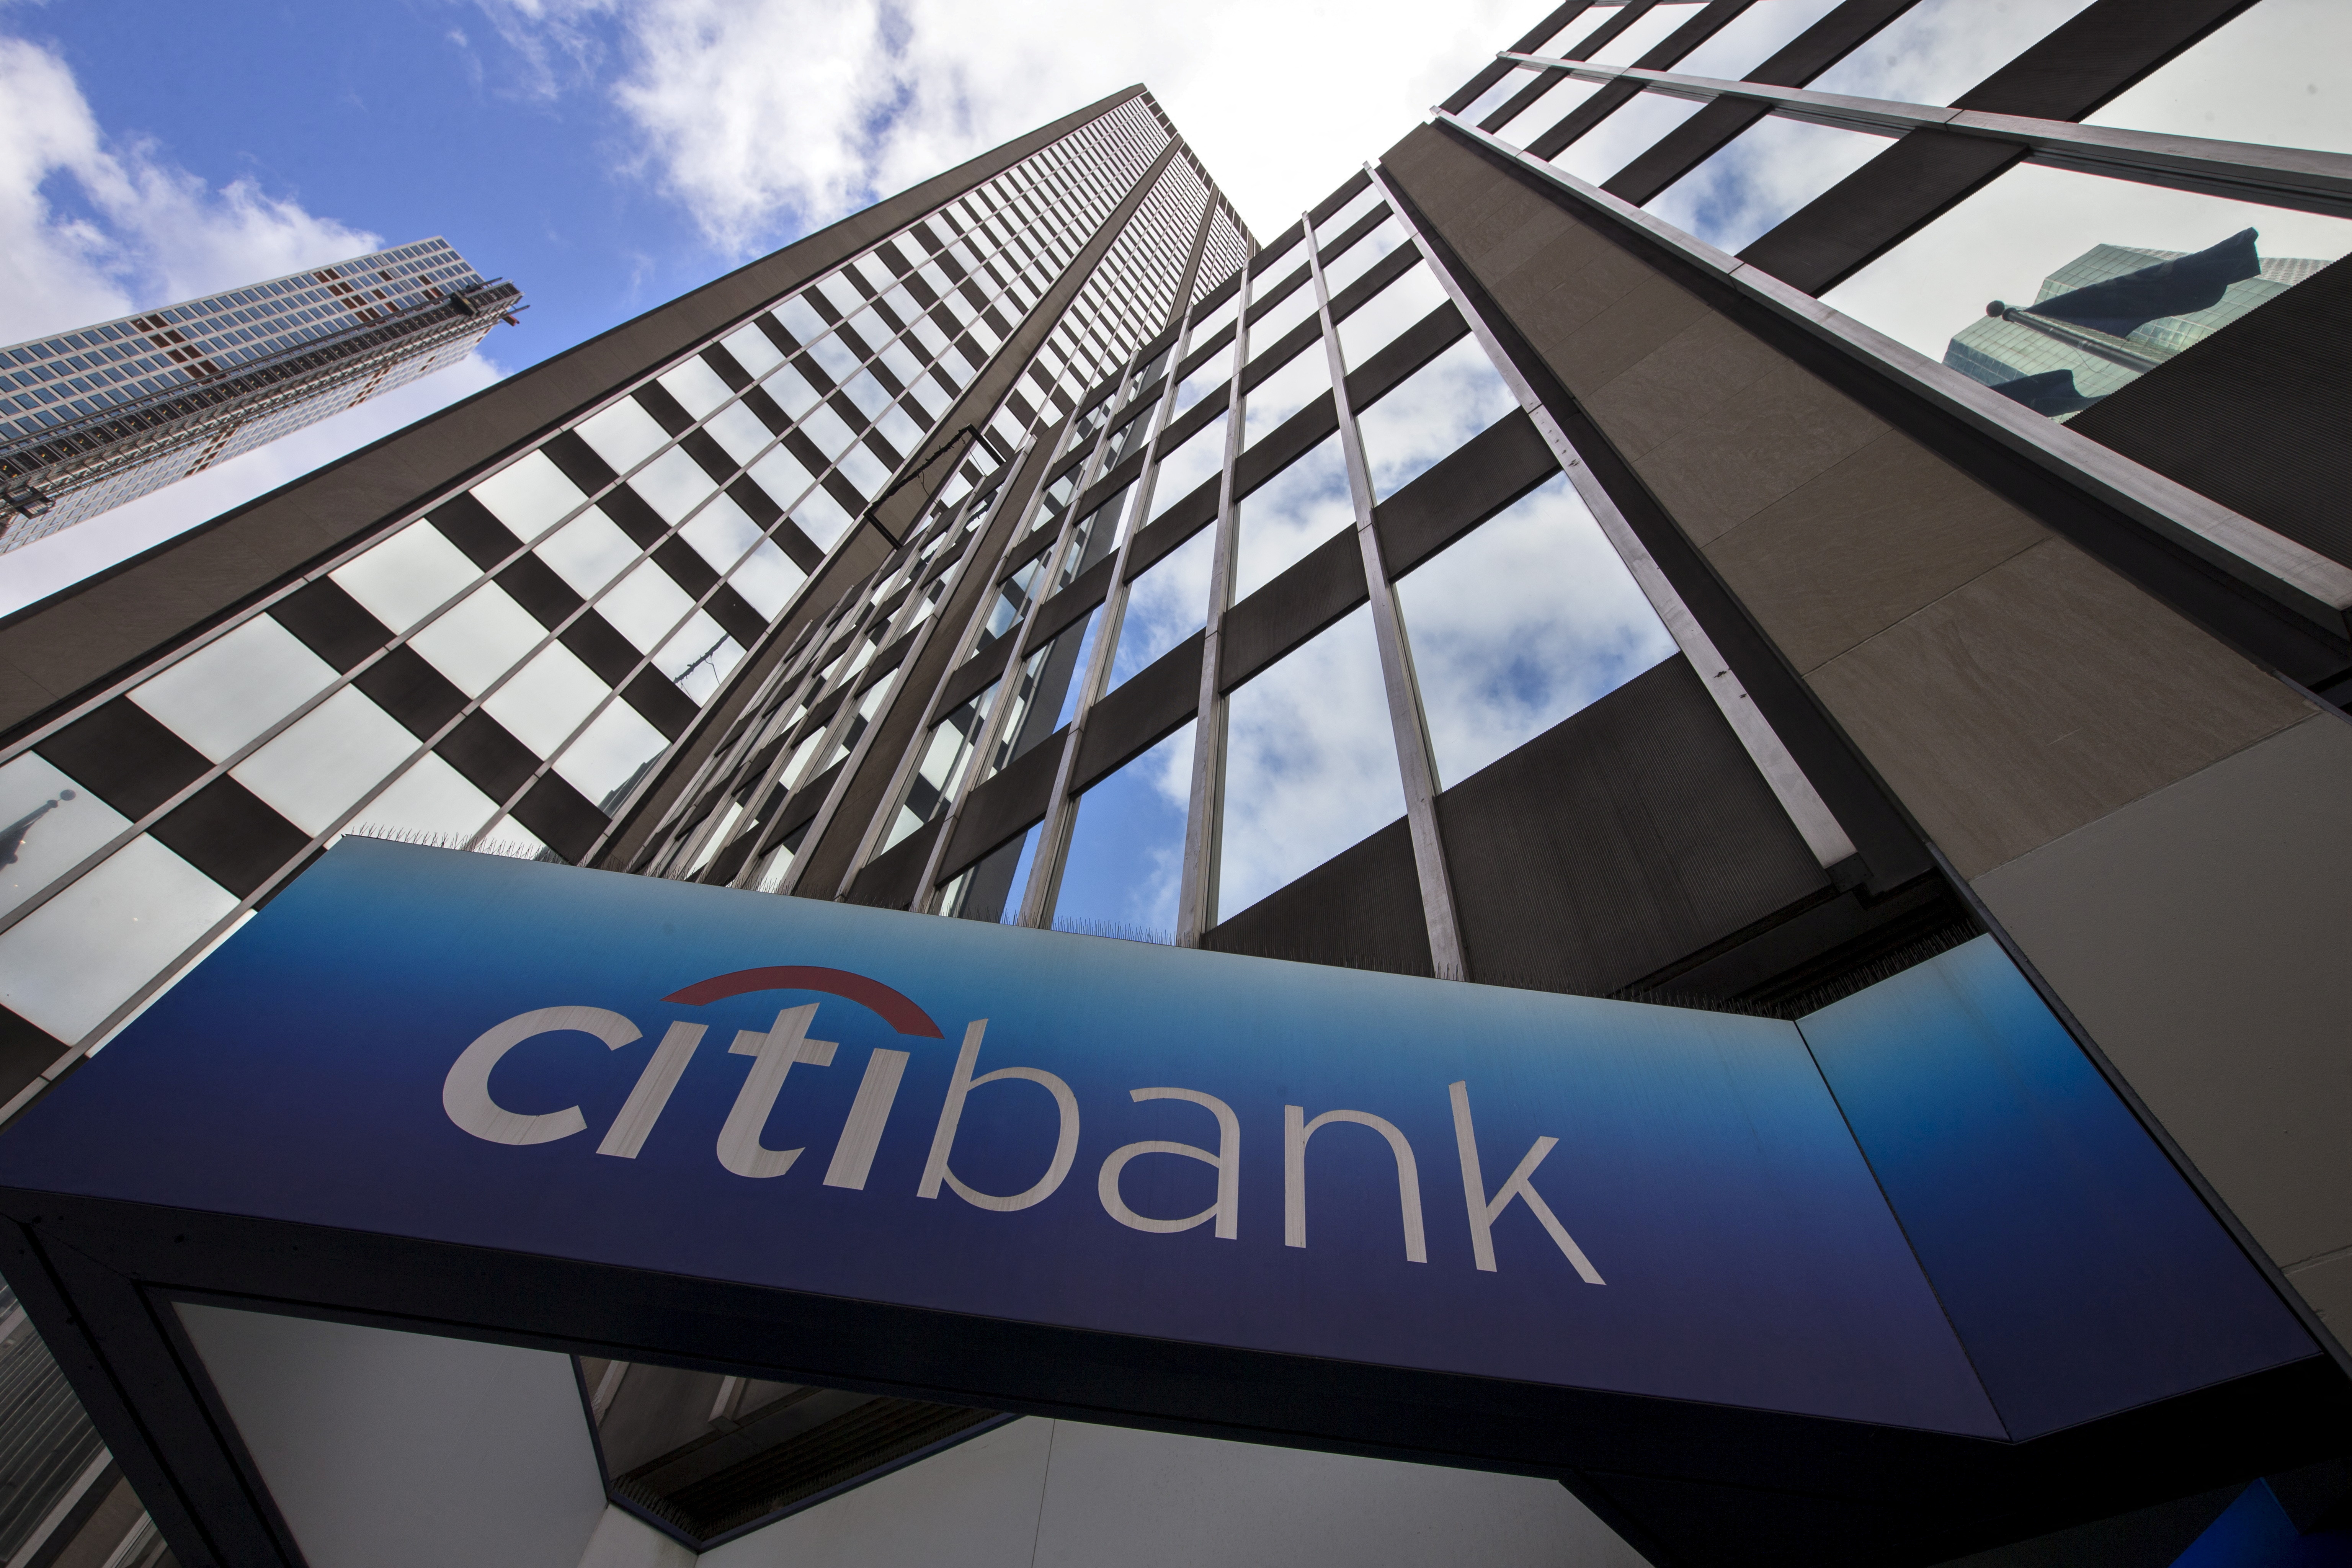 A view of the exterior of the Citibank corporate headquarters in New York, New York